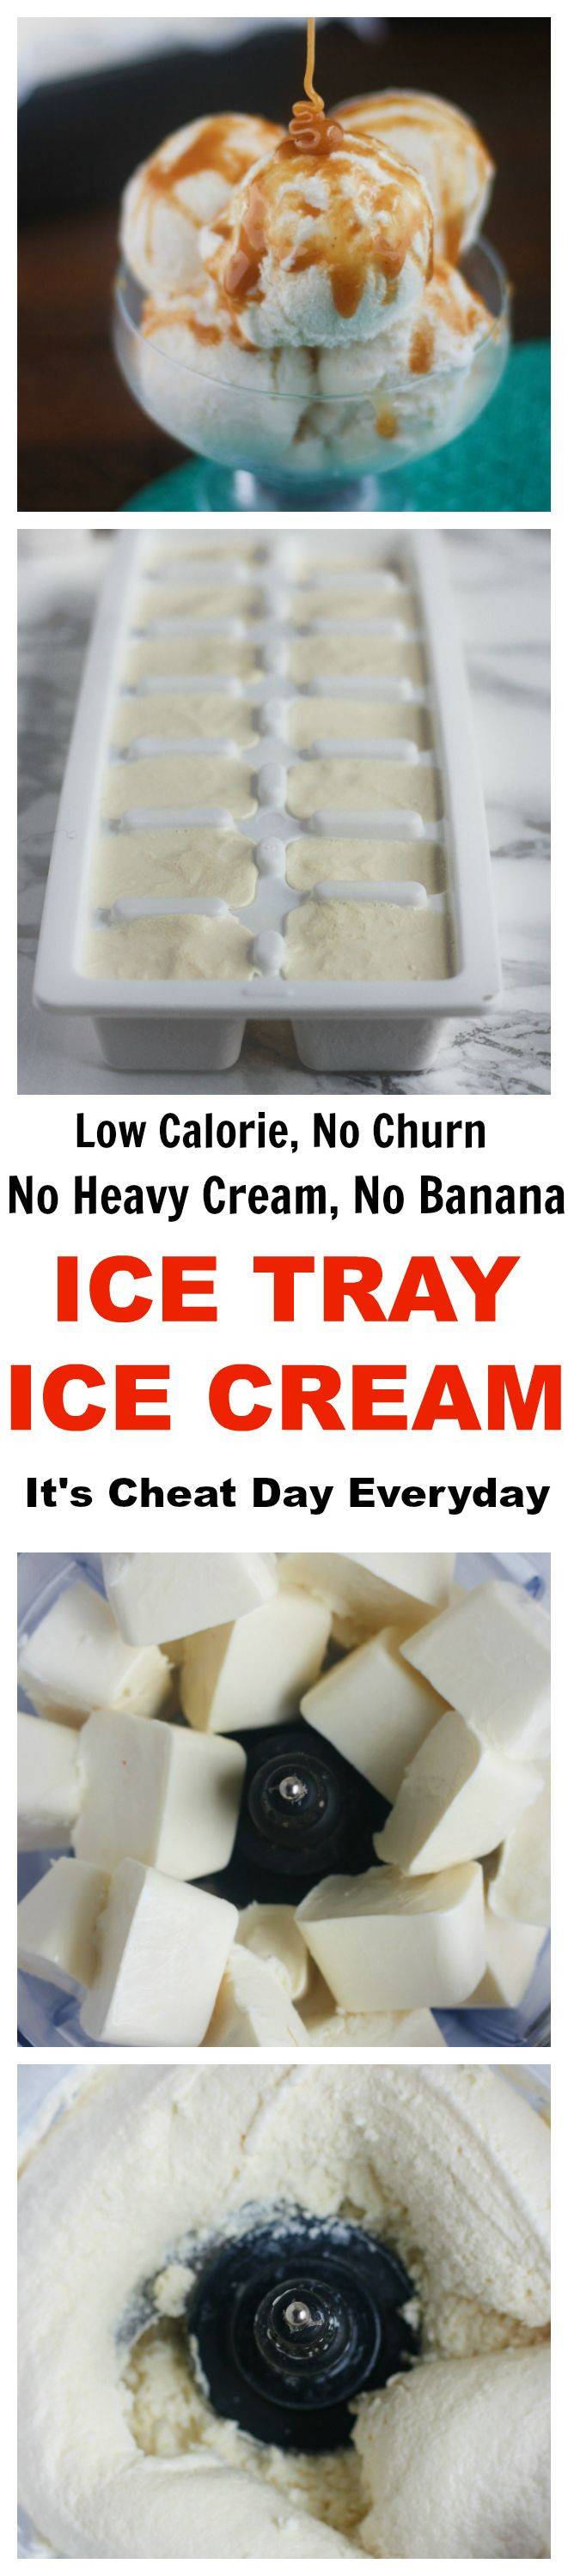 Low Calorie Ice Cream Recipes For Ice Cream Maker
 17 Best ideas about 3 Ingre nt Ice Cream on Pinterest